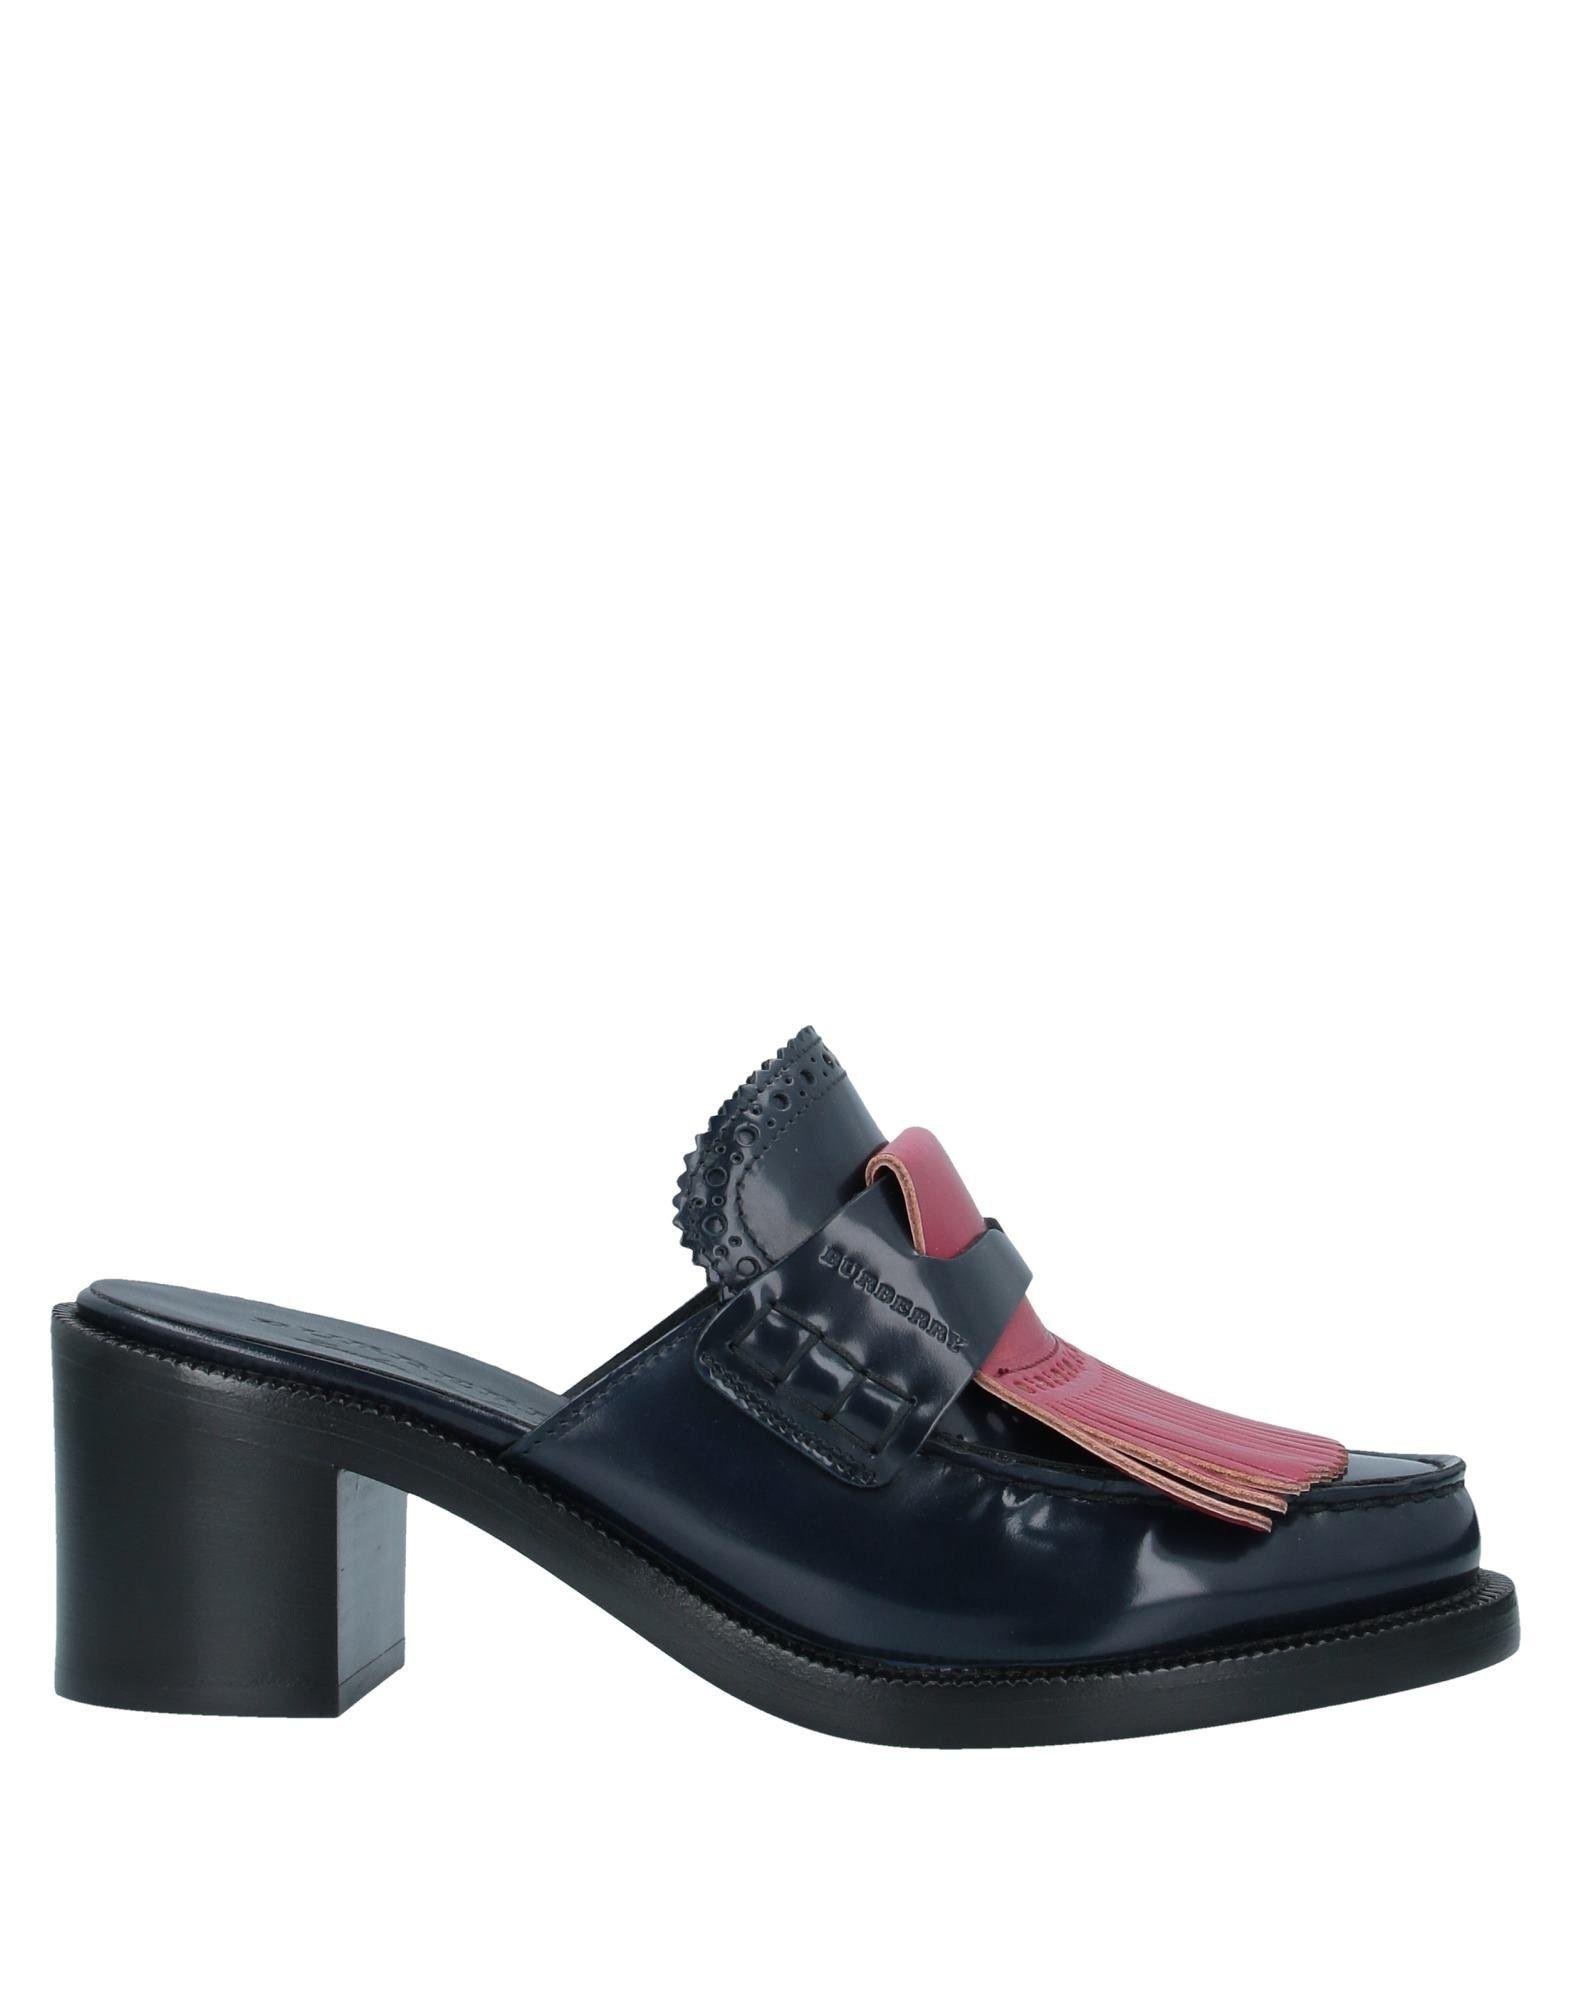 Burberry Leather Mules in Dark Blue (Blue) - Lyst